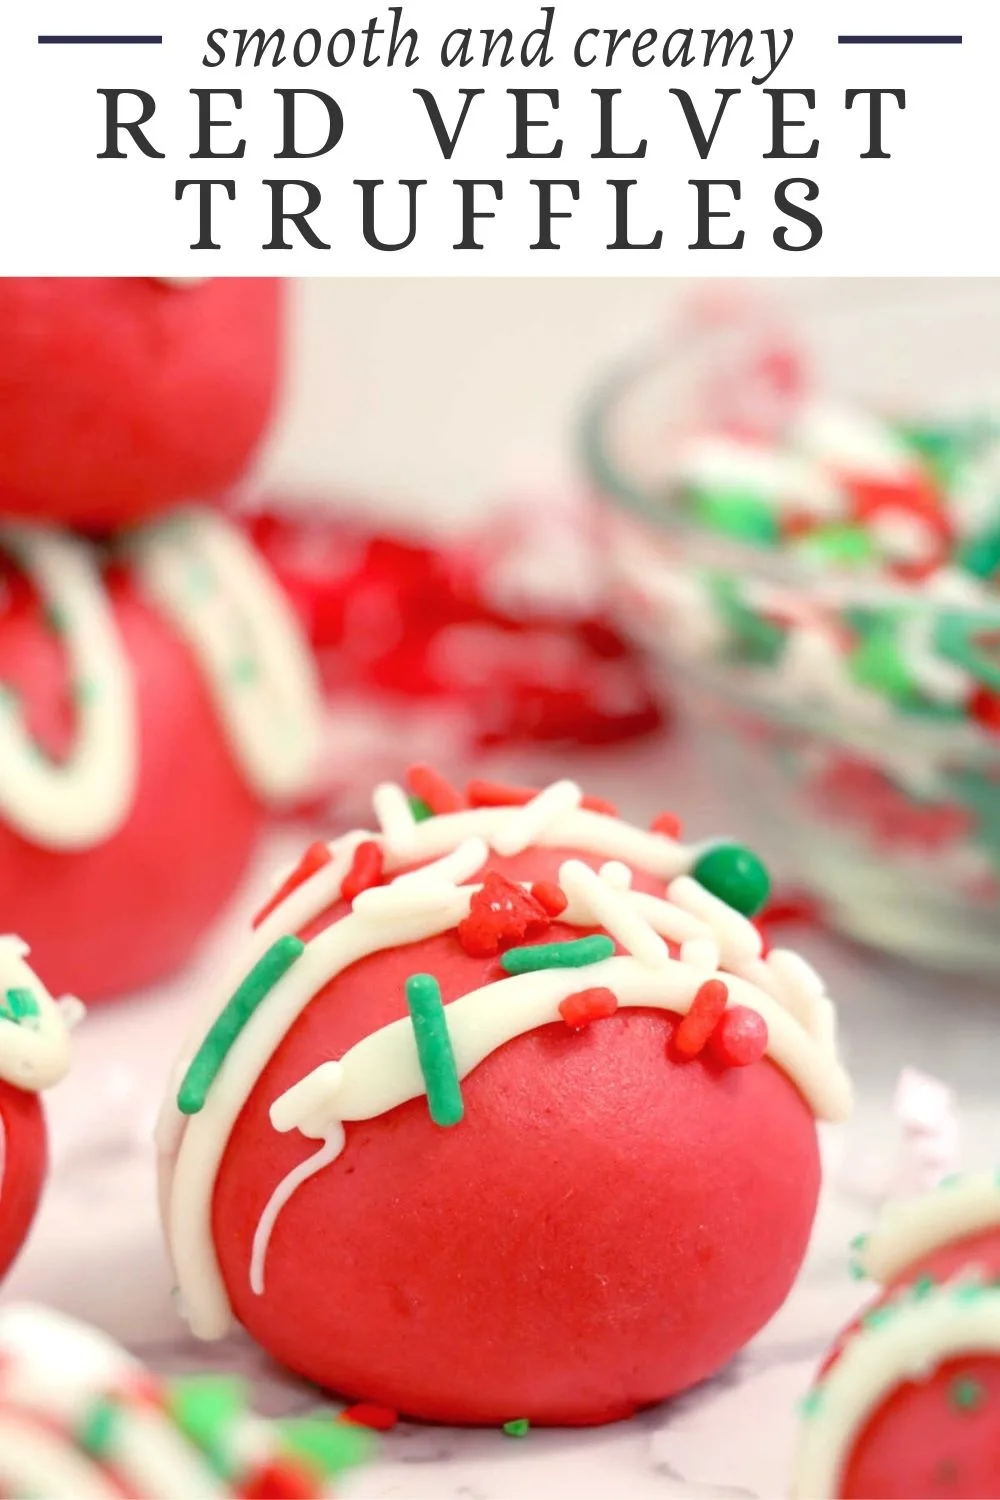 Red velvet truffles are such a quick and easy treat that bring such color and flavor to your dessert menu. These fudgy little bites are perfect for Christmas, Valentine's Day or just because.